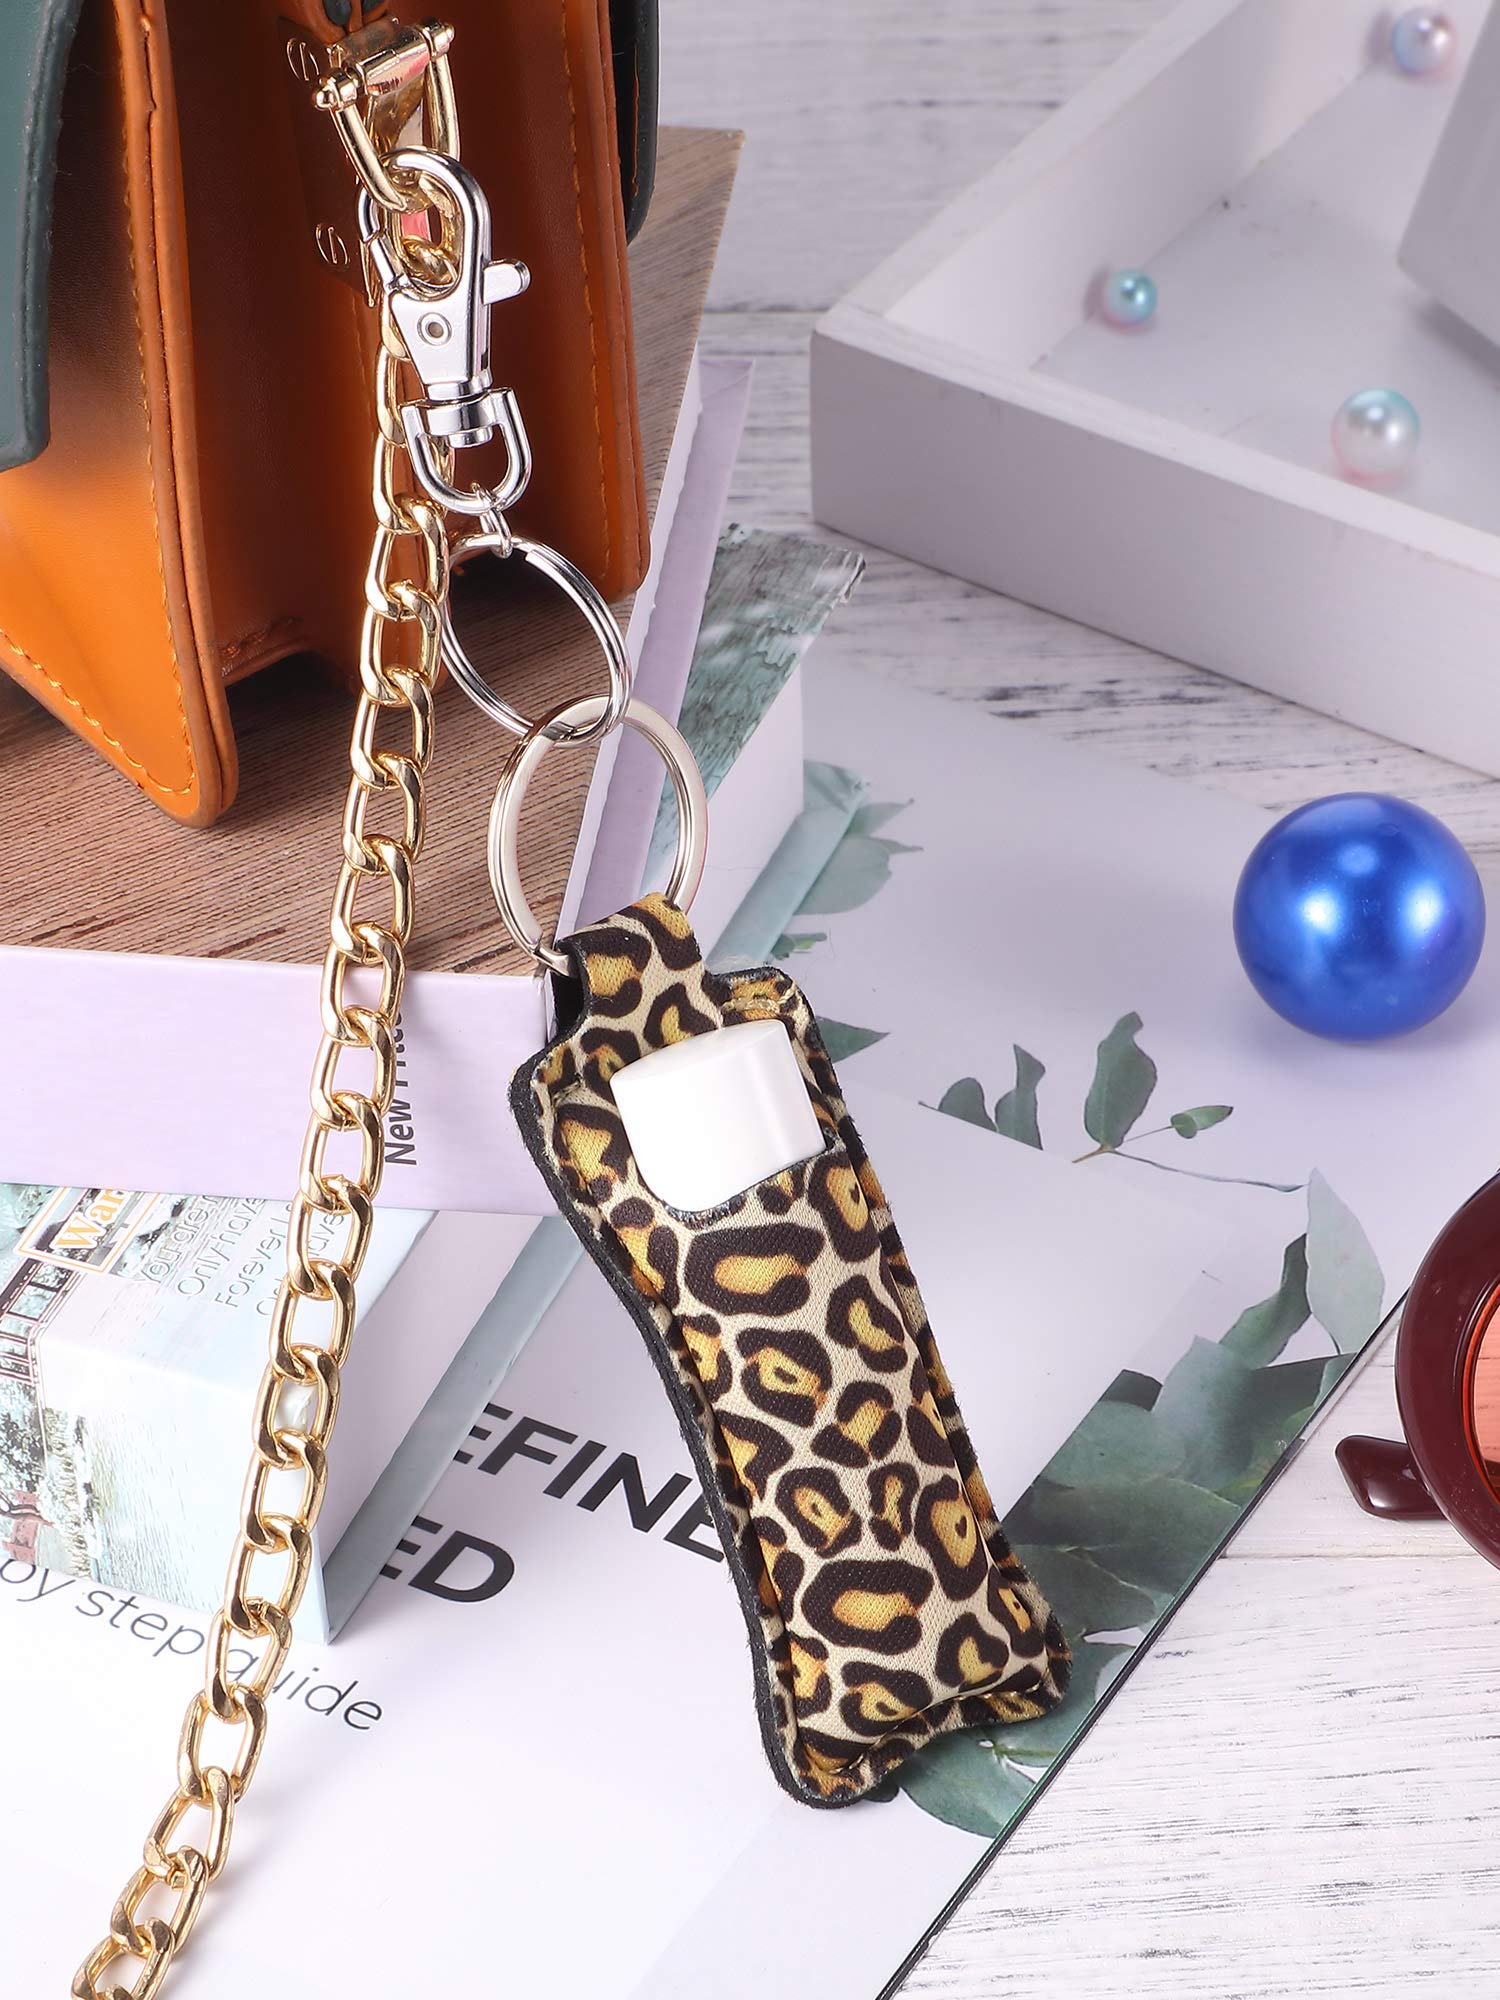 10 Pieces Cow Print Lipstick Holder Lipstick Holder Keychain Sleeve Lipstick Pouch Lip Balm Holder Sleeve with 10 Metal Key Chains to hold Travel Daily Accessories, Leopard Style